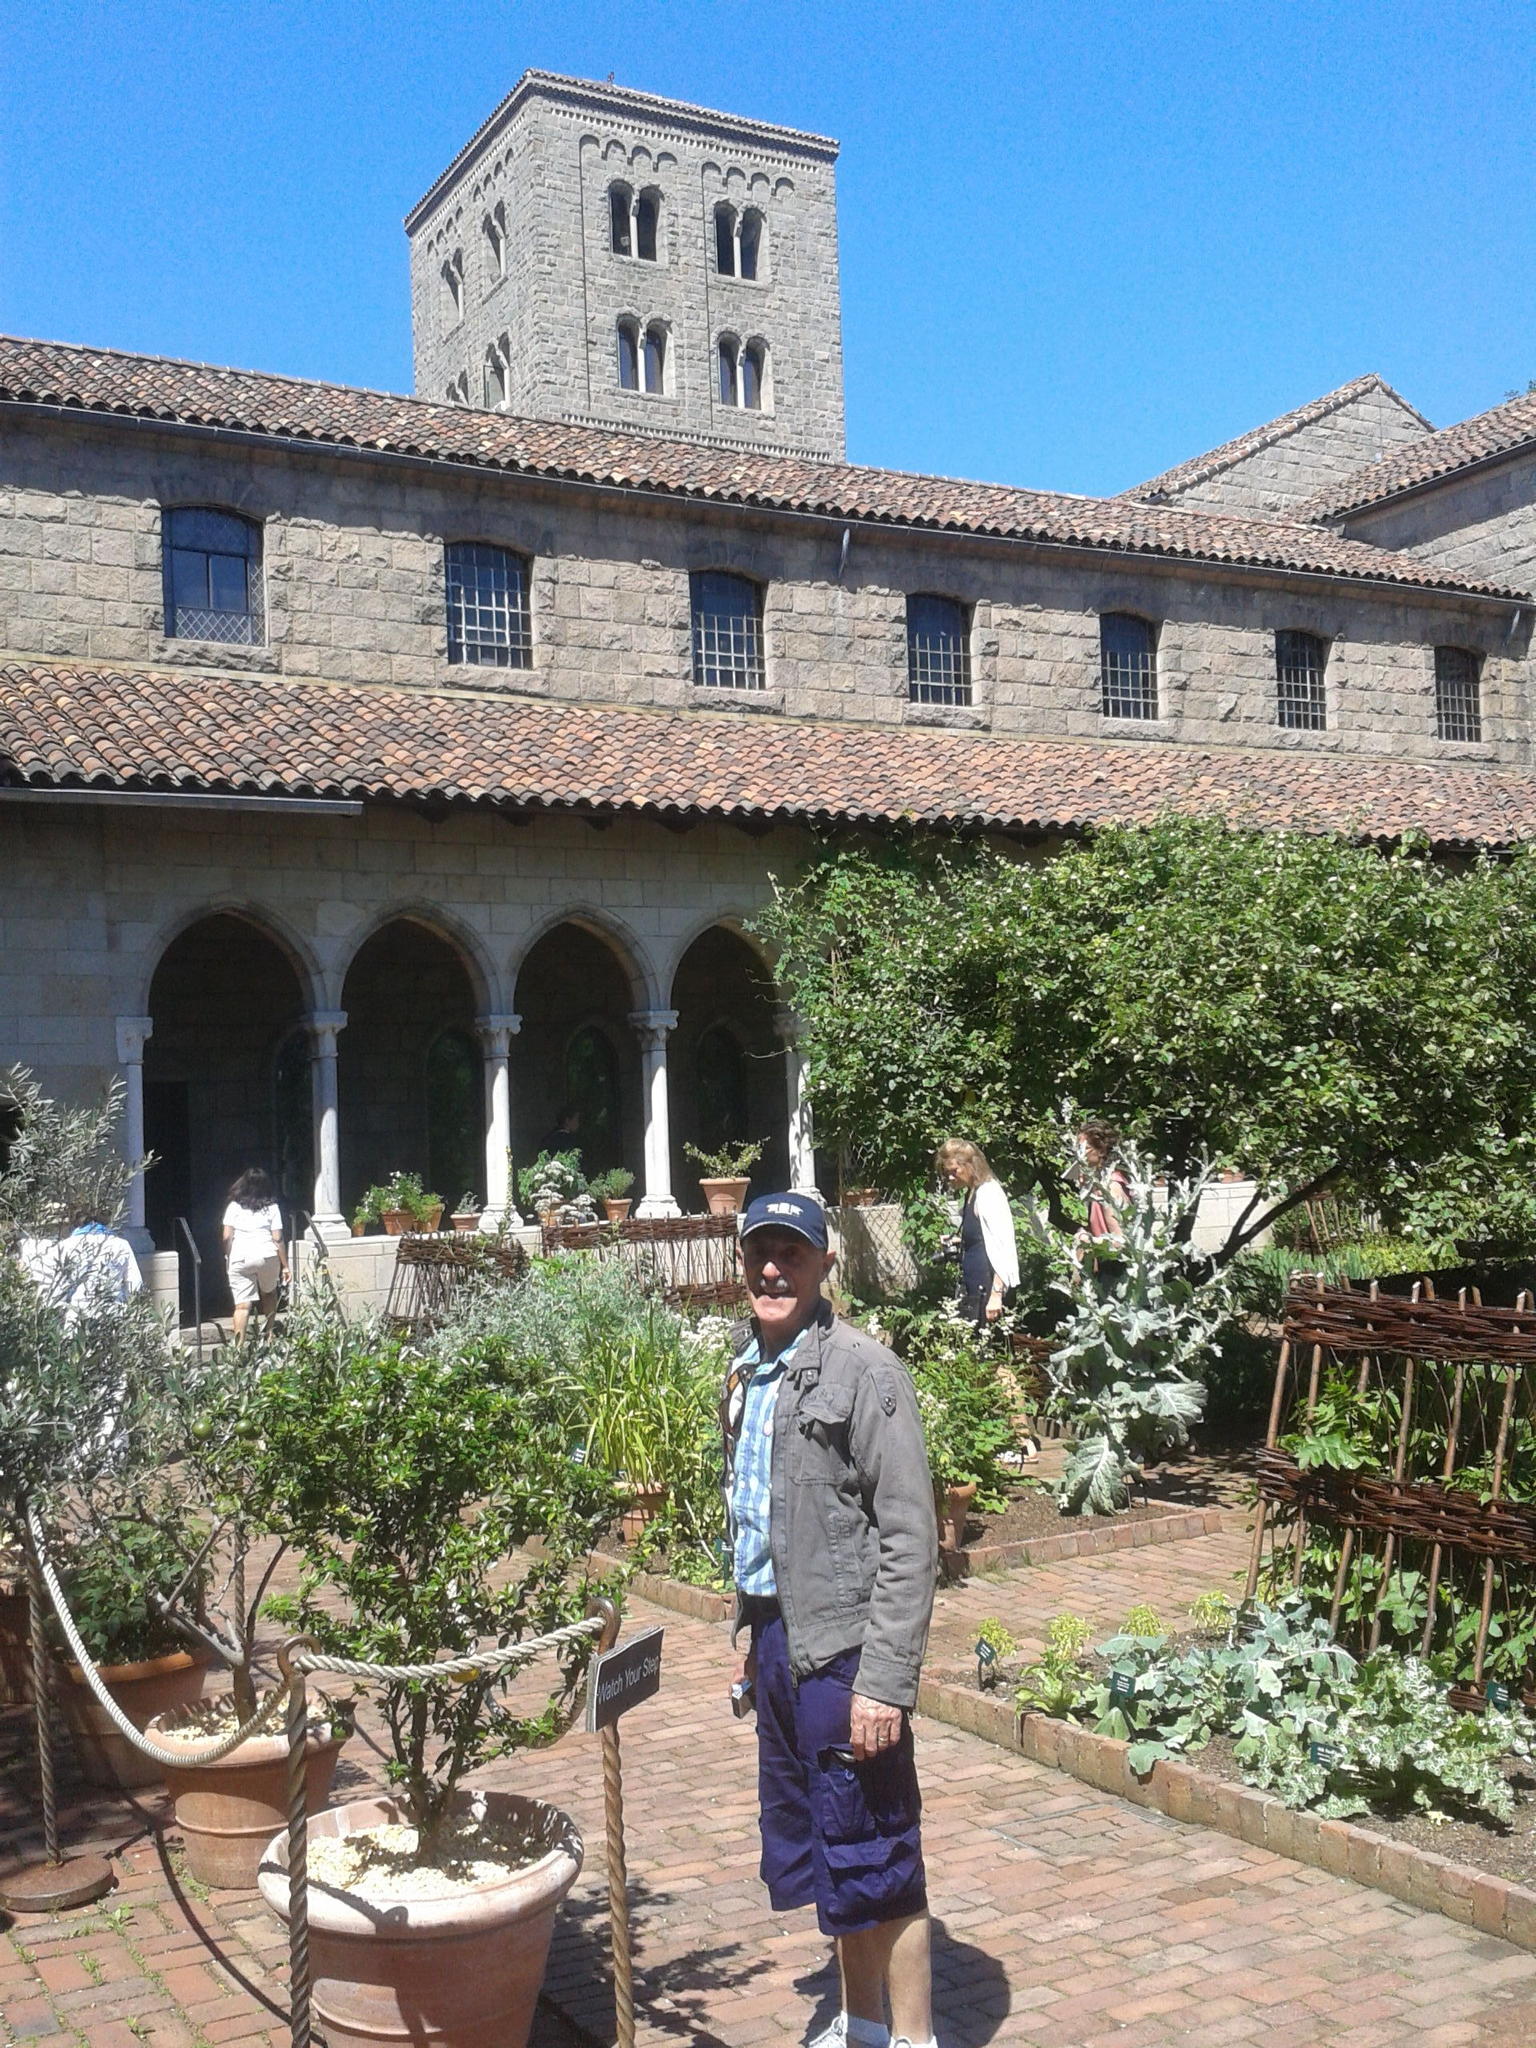 In the Cloisters garden